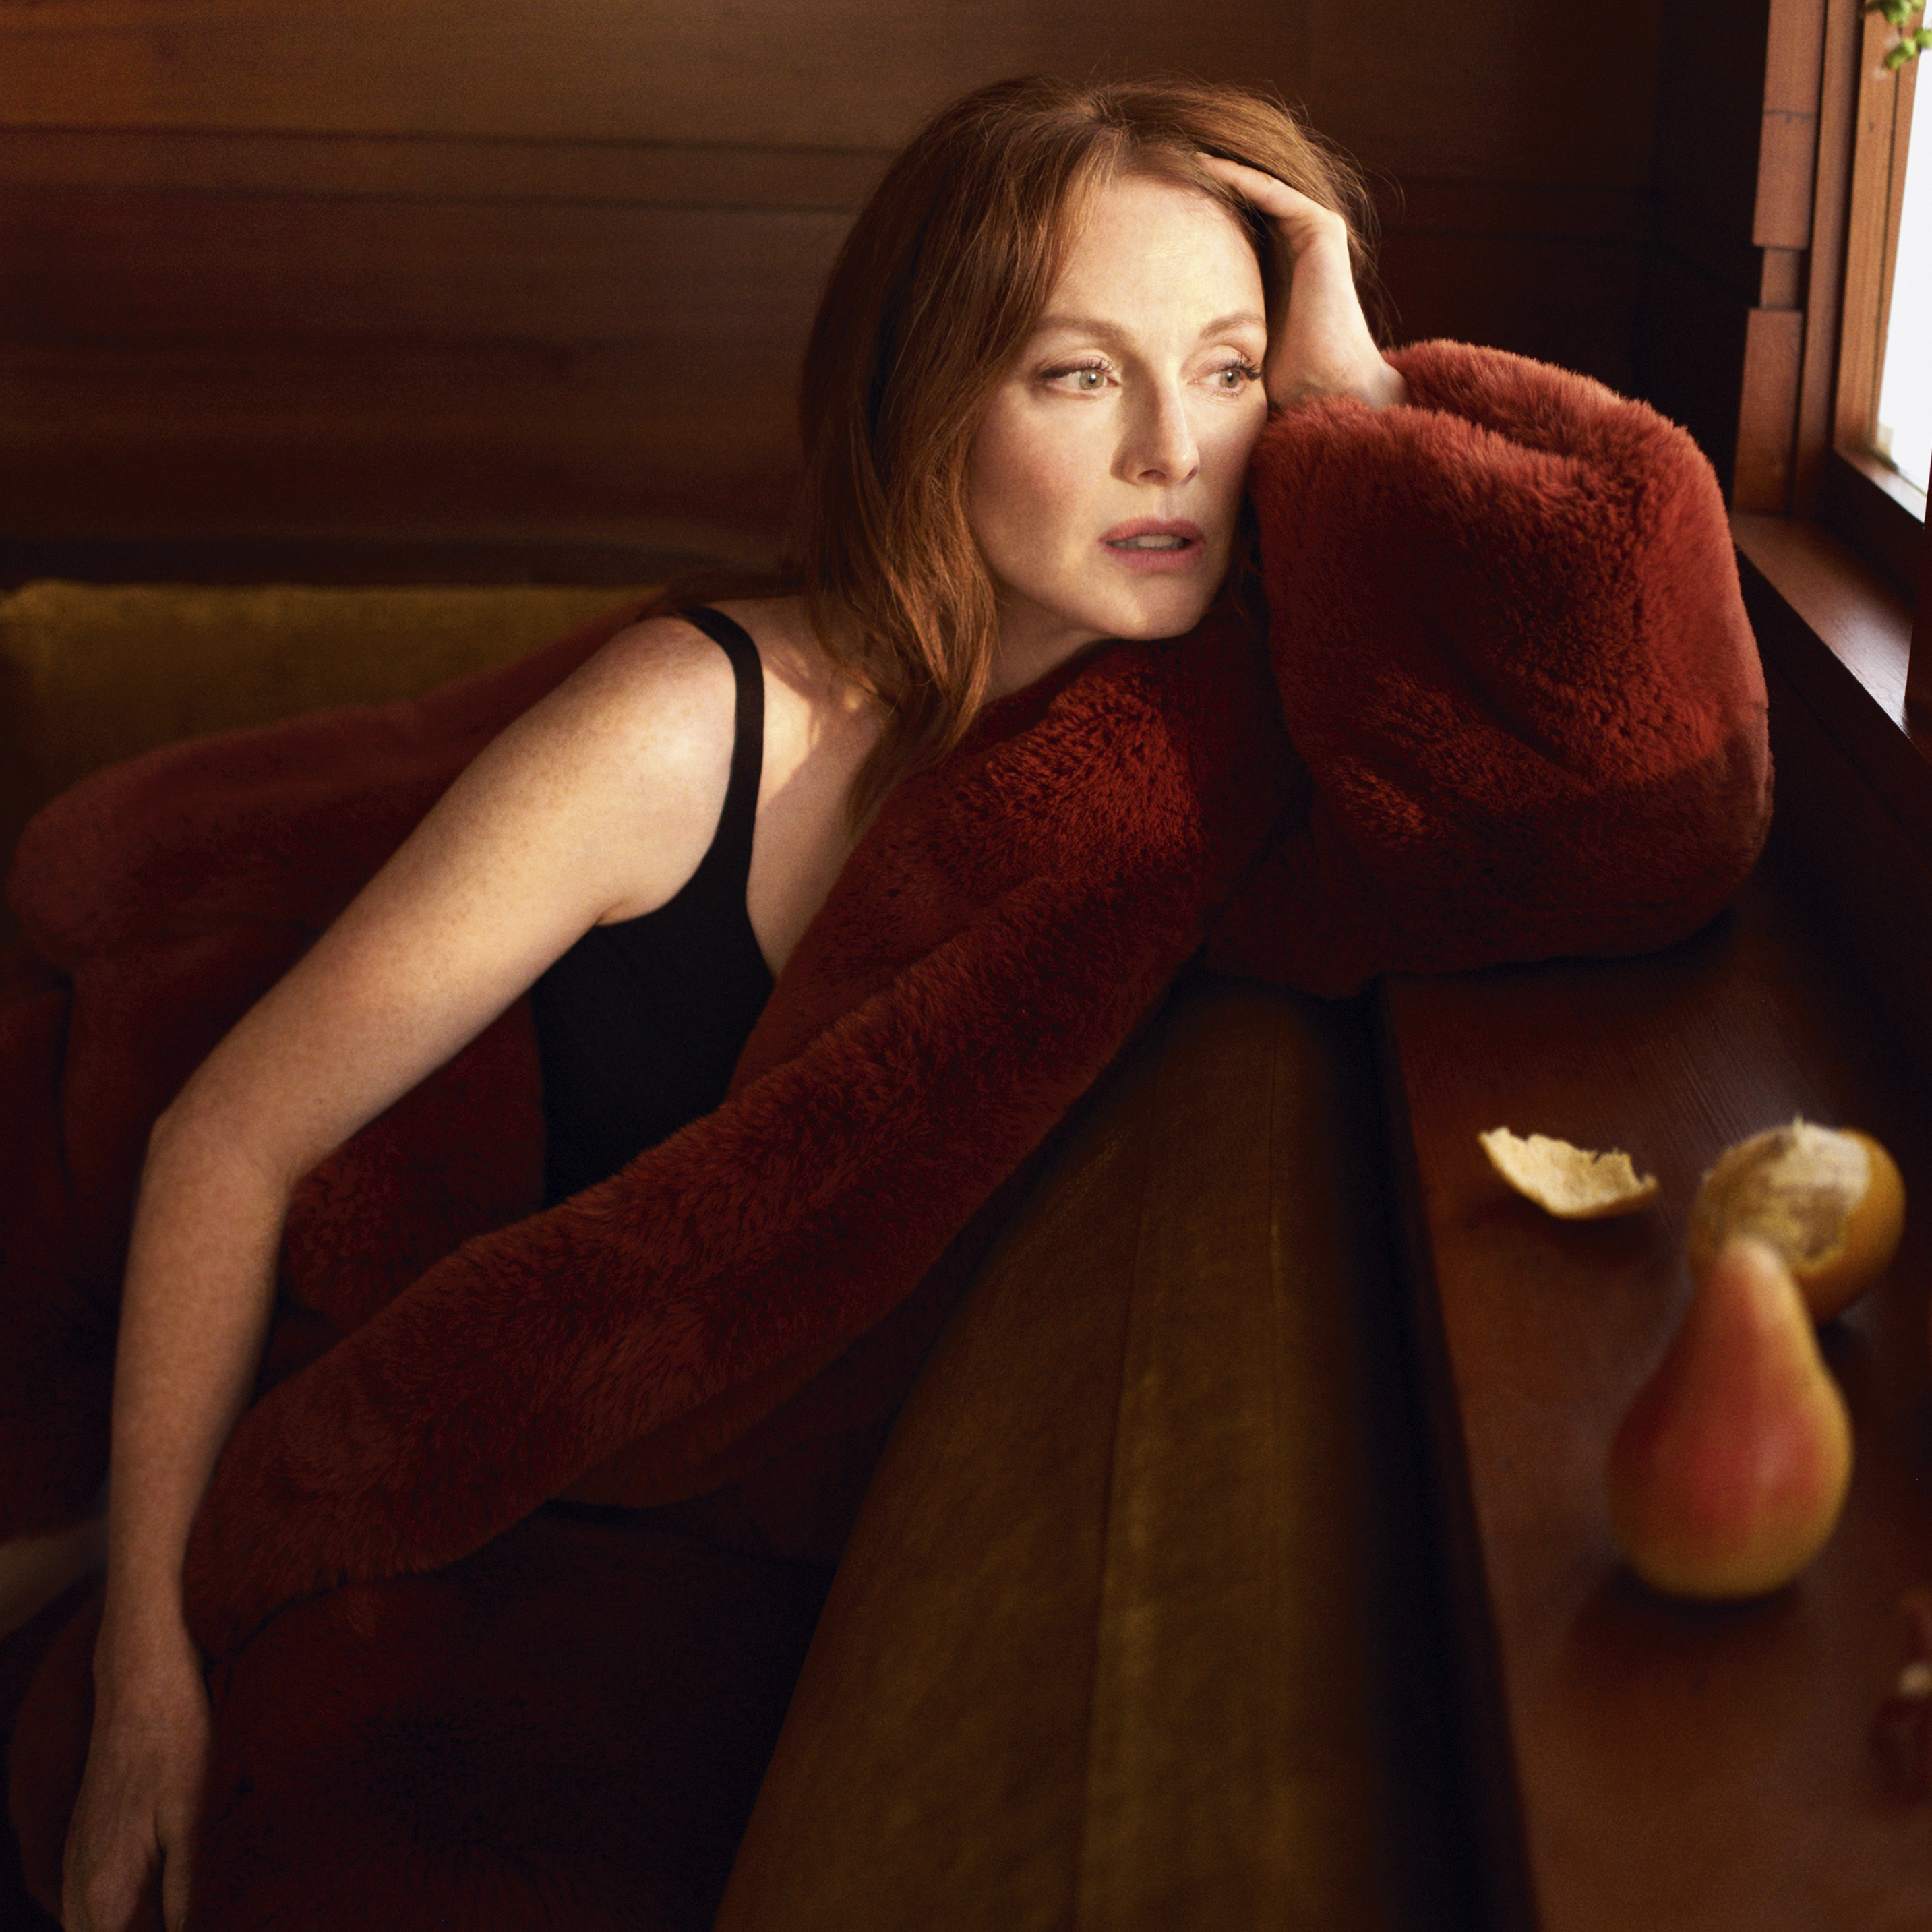 Julianne Moore, Michelle Williams, Sienna Miller, and More at the